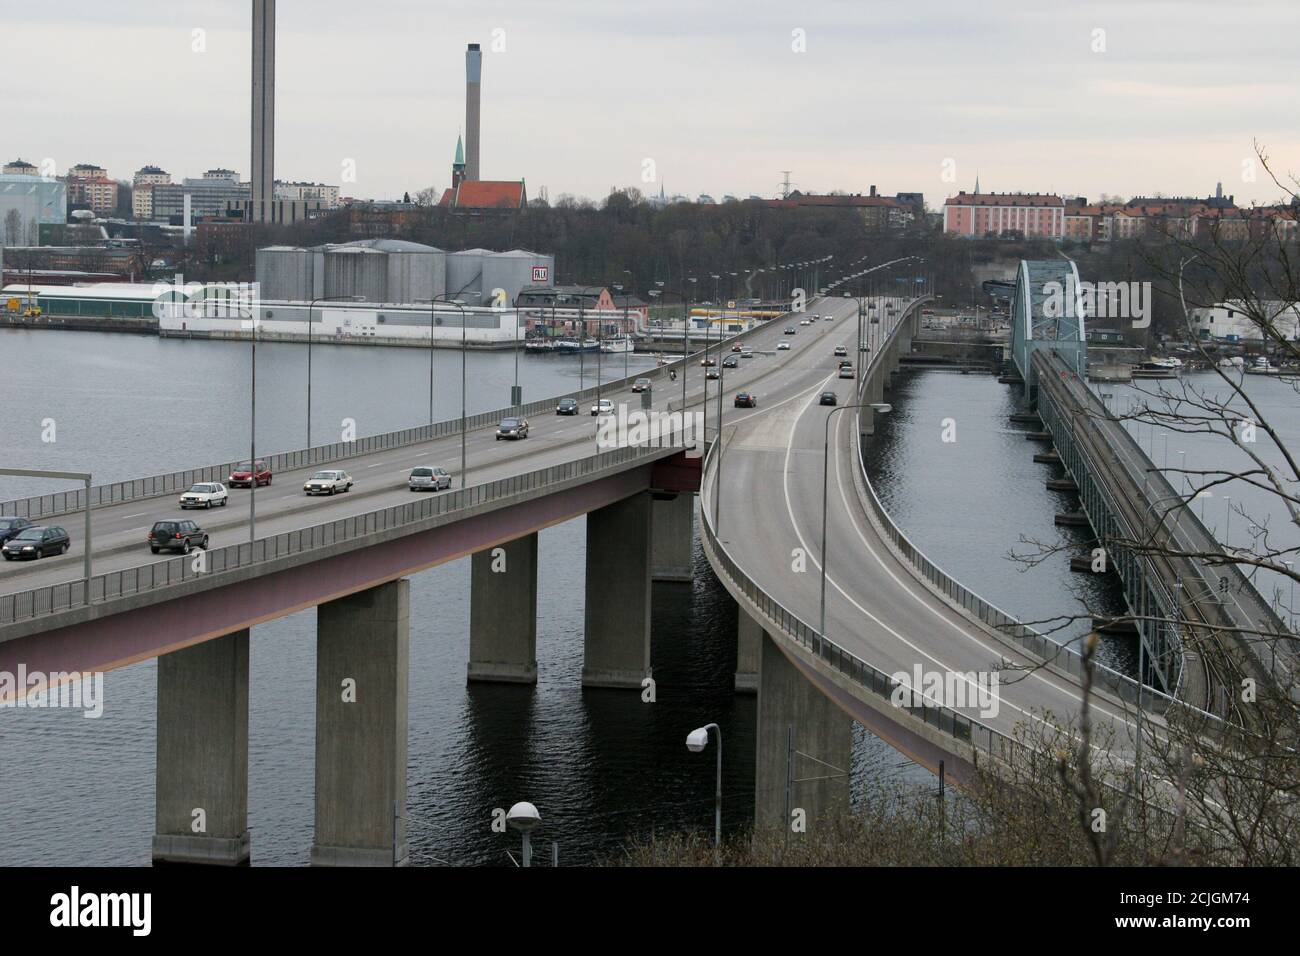 LIDINGÖ BRIDGE Stockholm Sweden the new to left and the old t right connect Island and town Lidingö with the rest of Stockholm area Stock Photo